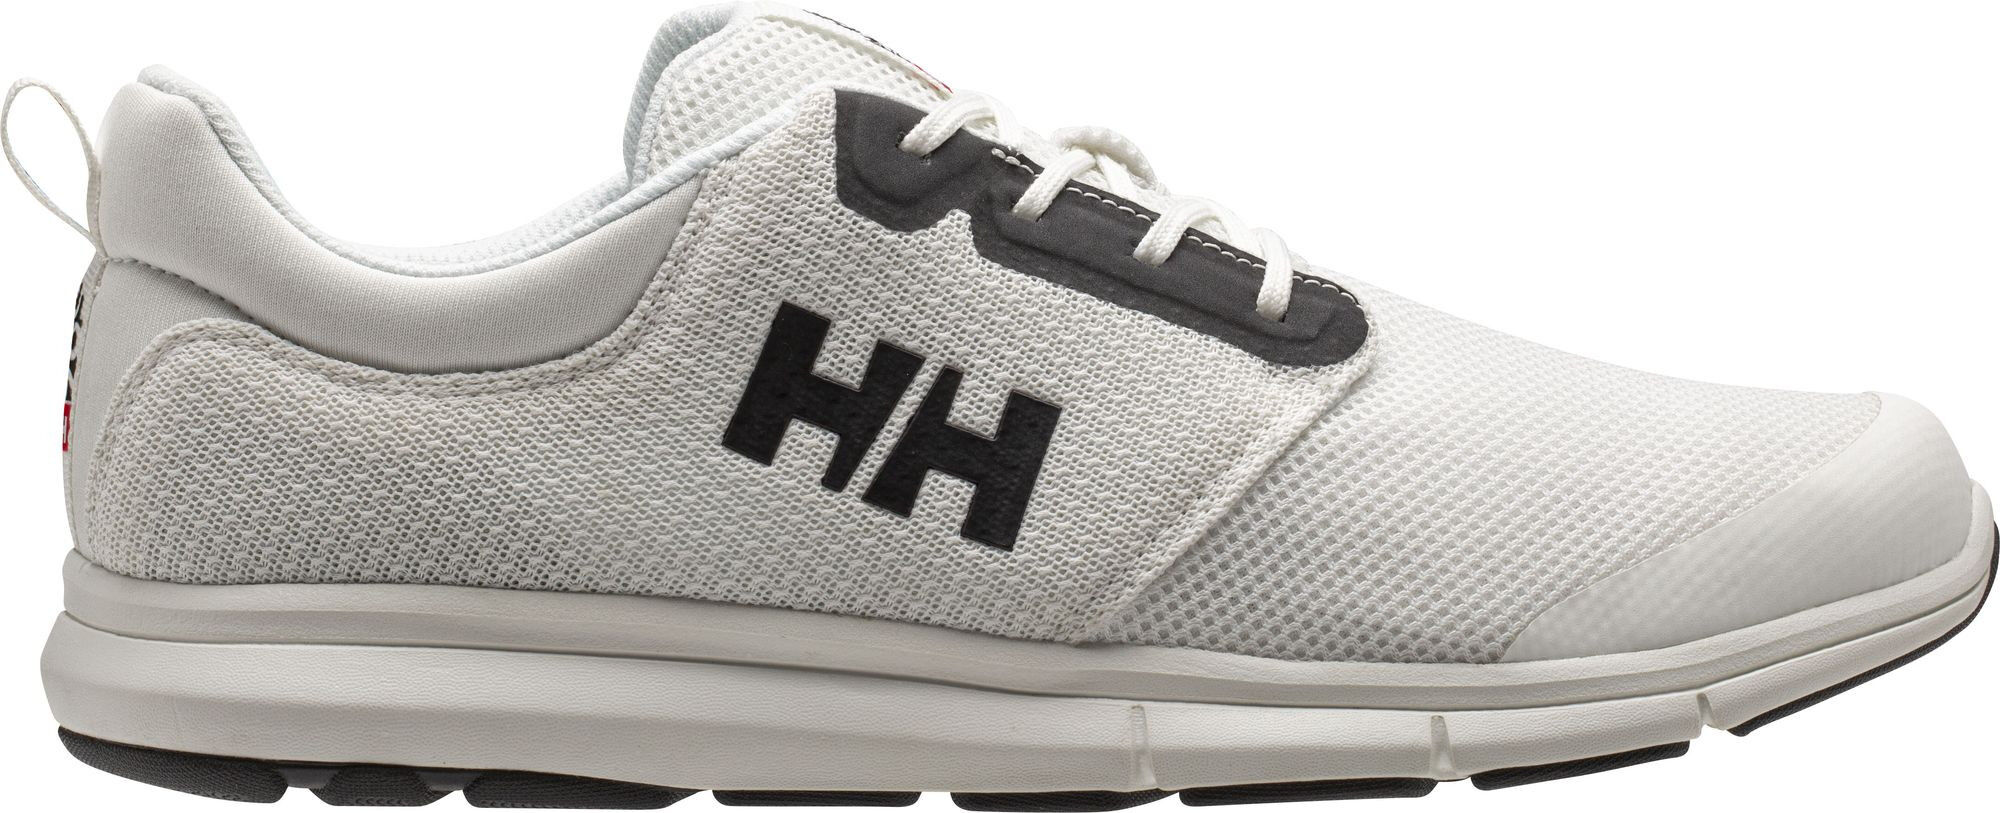 Helly Hansen Feathering - Chaussures voile homme | Hardloop